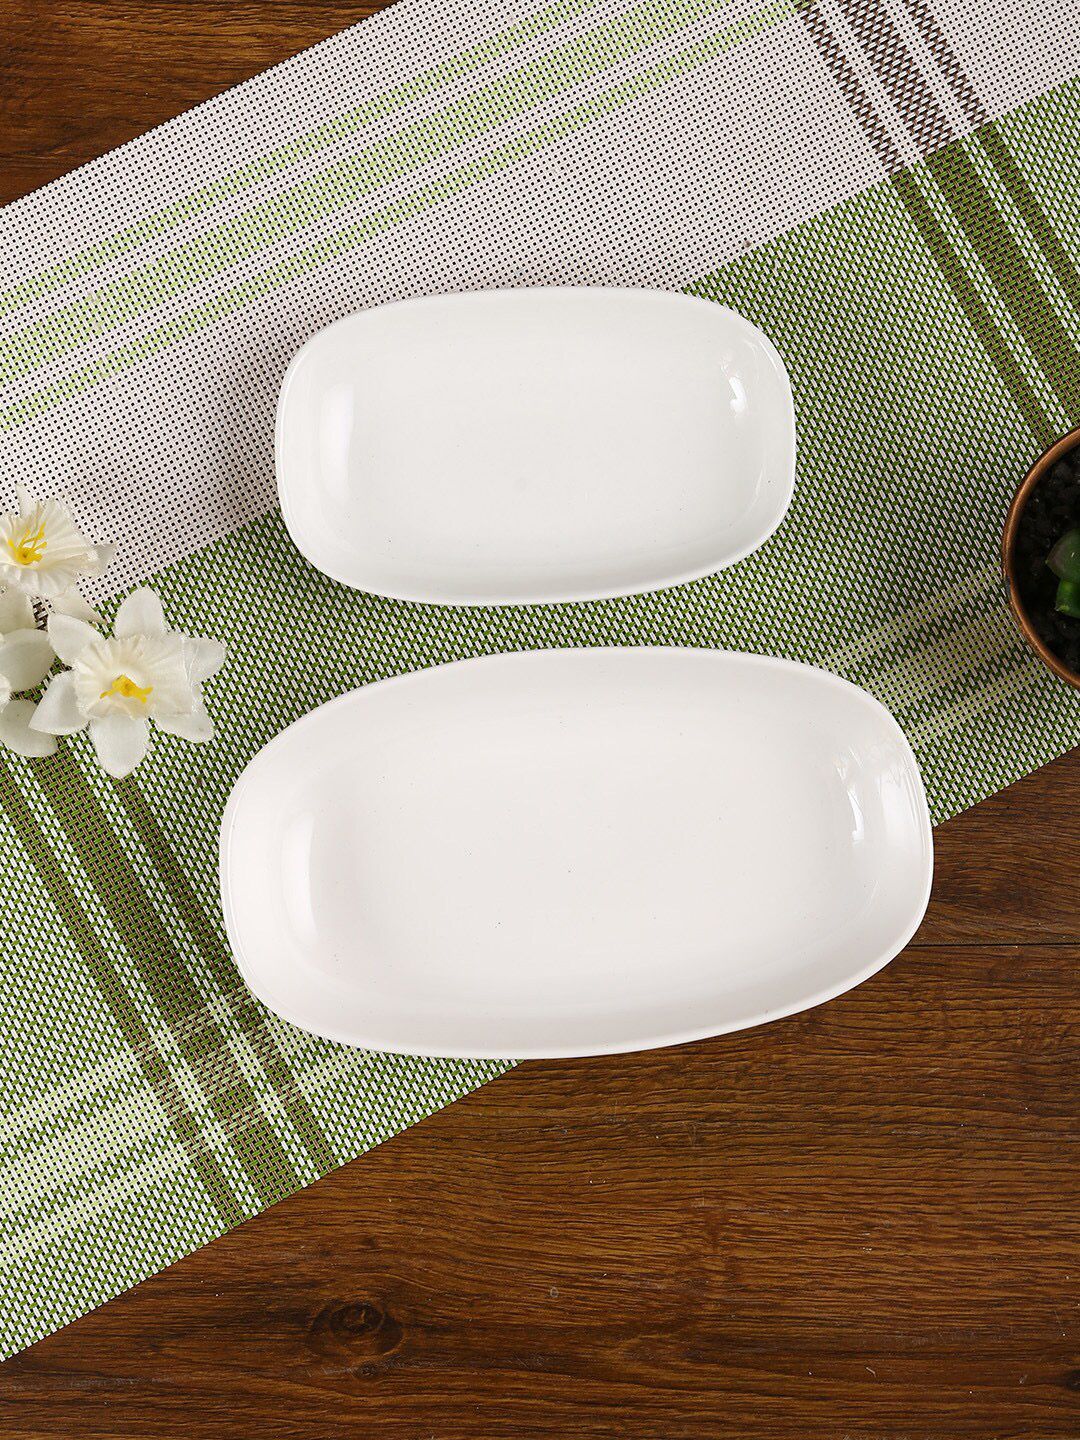 Aapno Rajasthan White 2 Pieces Porcelain Glossy Plates Price in India